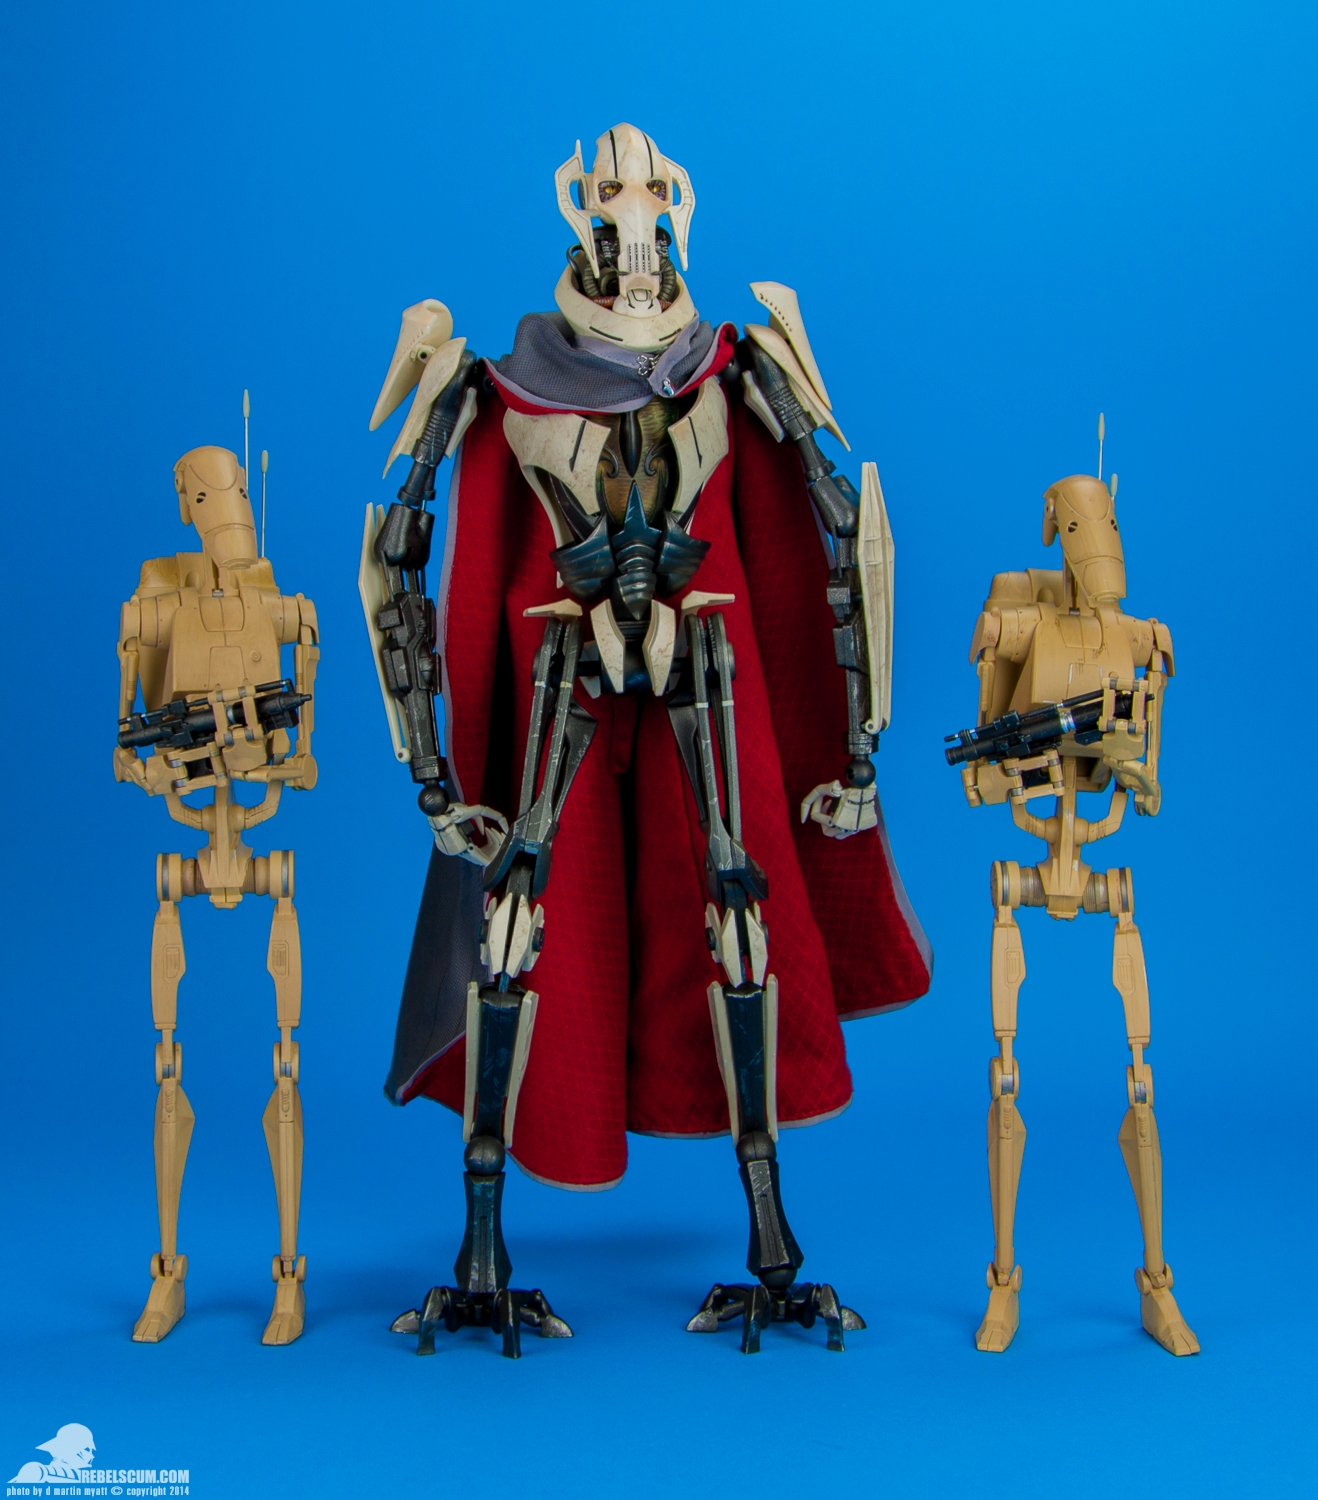 General-Grievous-Sixth-Scale-Figure-Sideshow-Collectibles-024.jpg